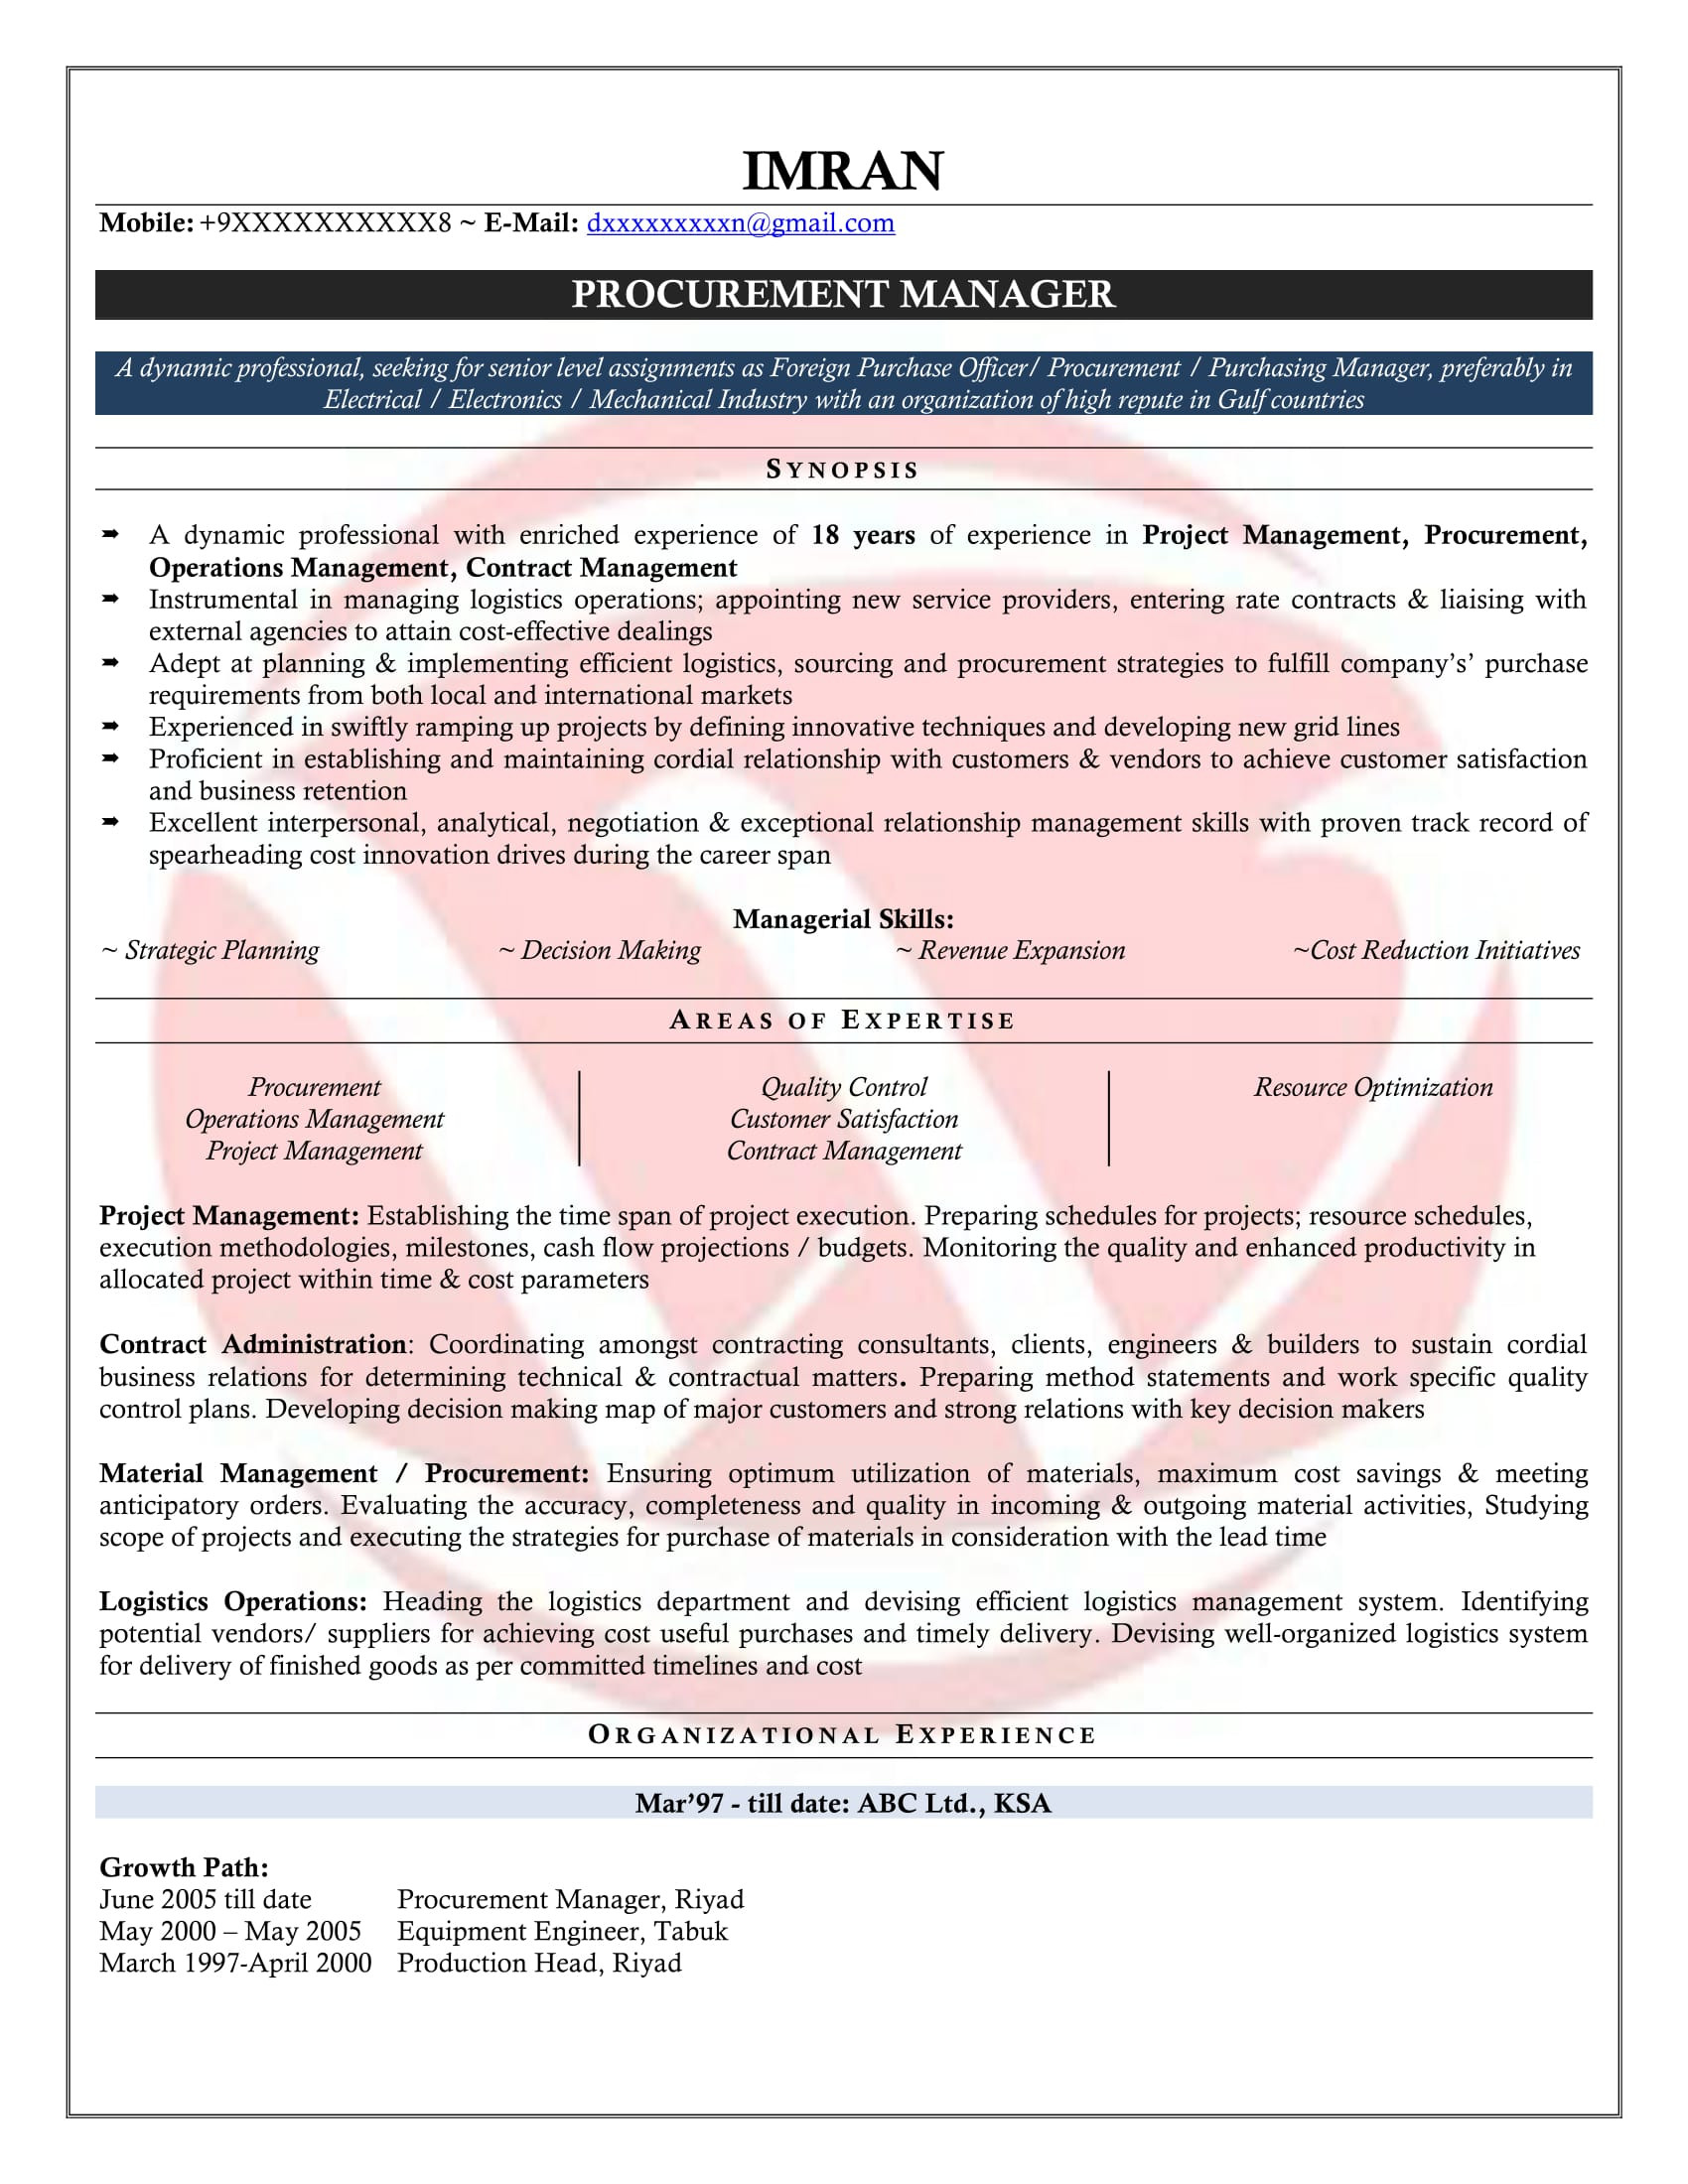 Sample Resume for Purchase Manager India Purchase Manager Sample Resumes, Download Resume format Templates!